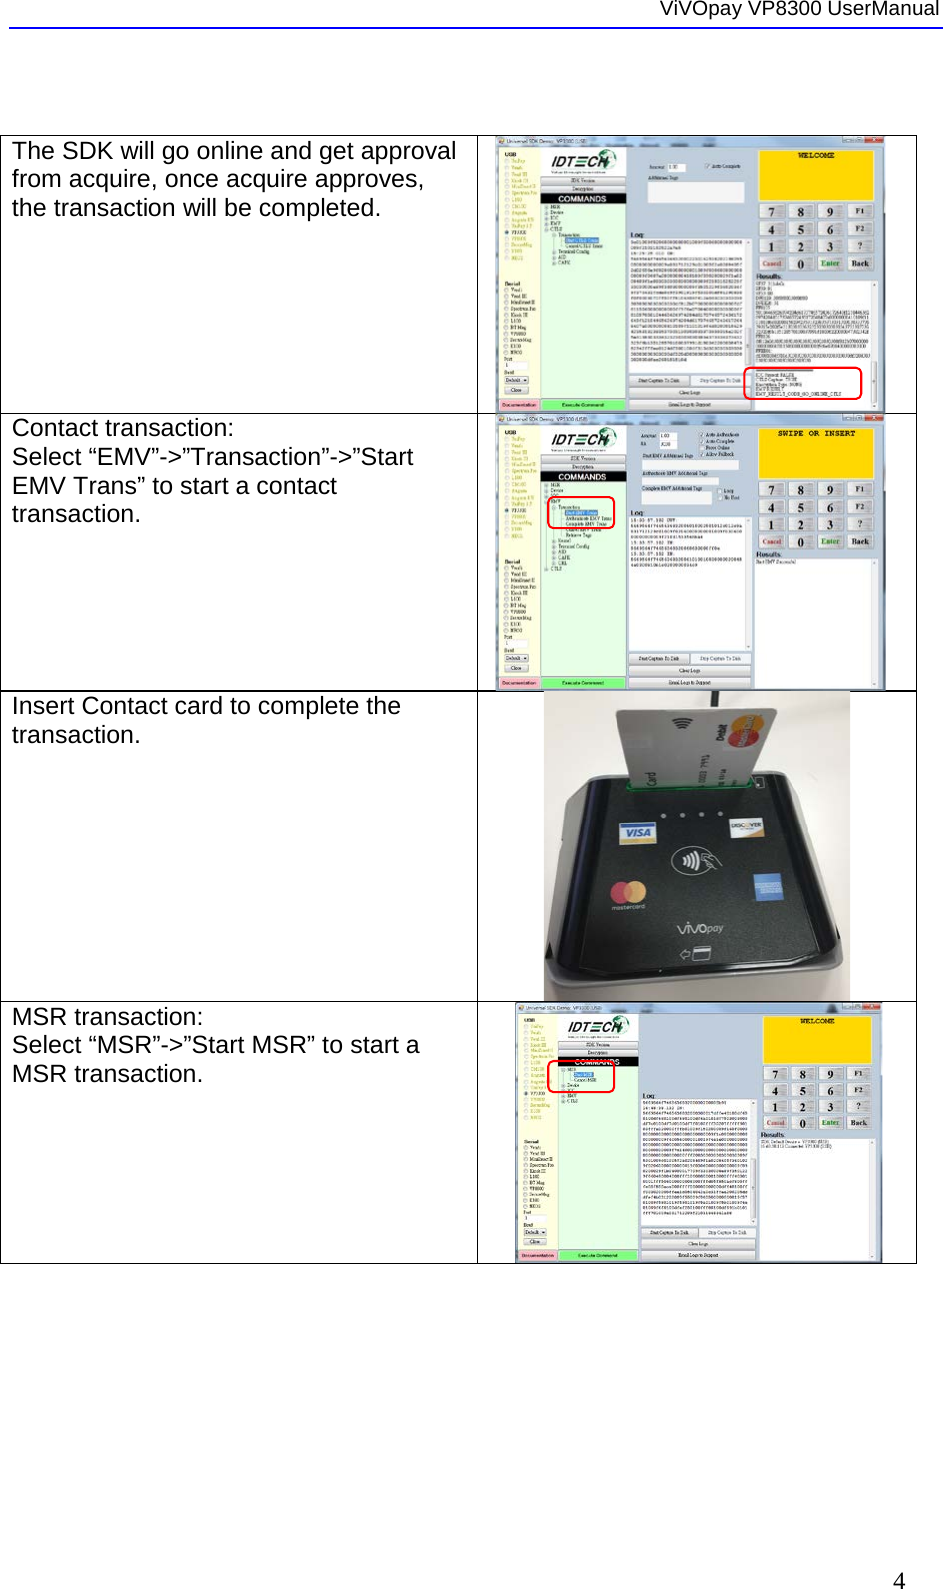  ViVOpay VP8300 UserManual     4  The SDK will go online and get approval from acquire, once acquire approves, the transaction will be completed.    Contact transaction:  Select “EMV”-&gt;”Transaction”-&gt;”Start EMV Trans” to start a contact transaction.    Insert Contact card to complete the transaction.   MSR transaction:  Select “MSR”-&gt;”Start MSR” to start a MSR transaction.    